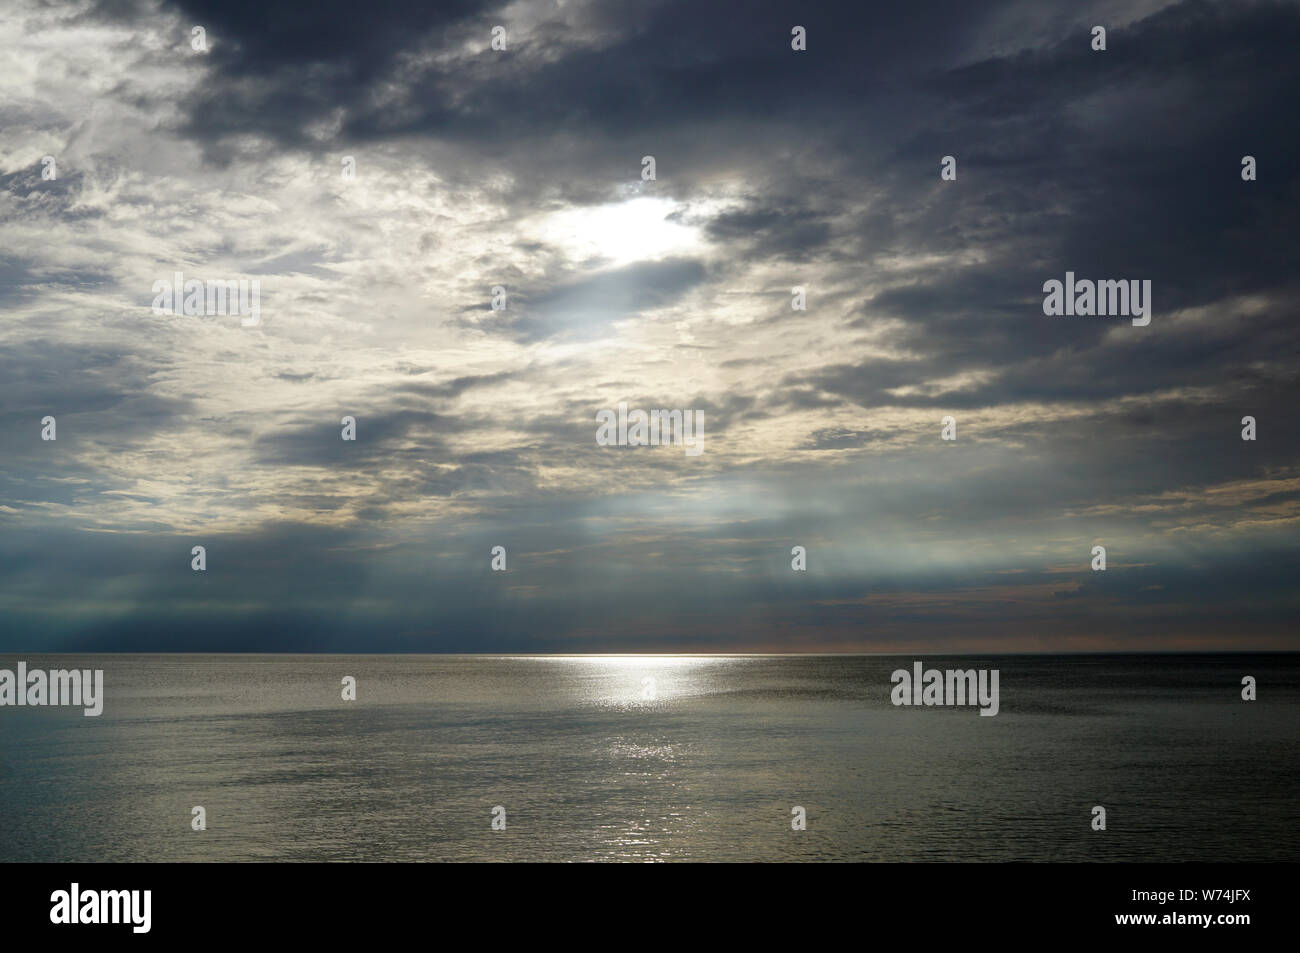 Sunset sky over the sea. The light of the sun makes its way through the clouds and the sun's rays shine above the surface of the water. Lake of Michig Stock Photo